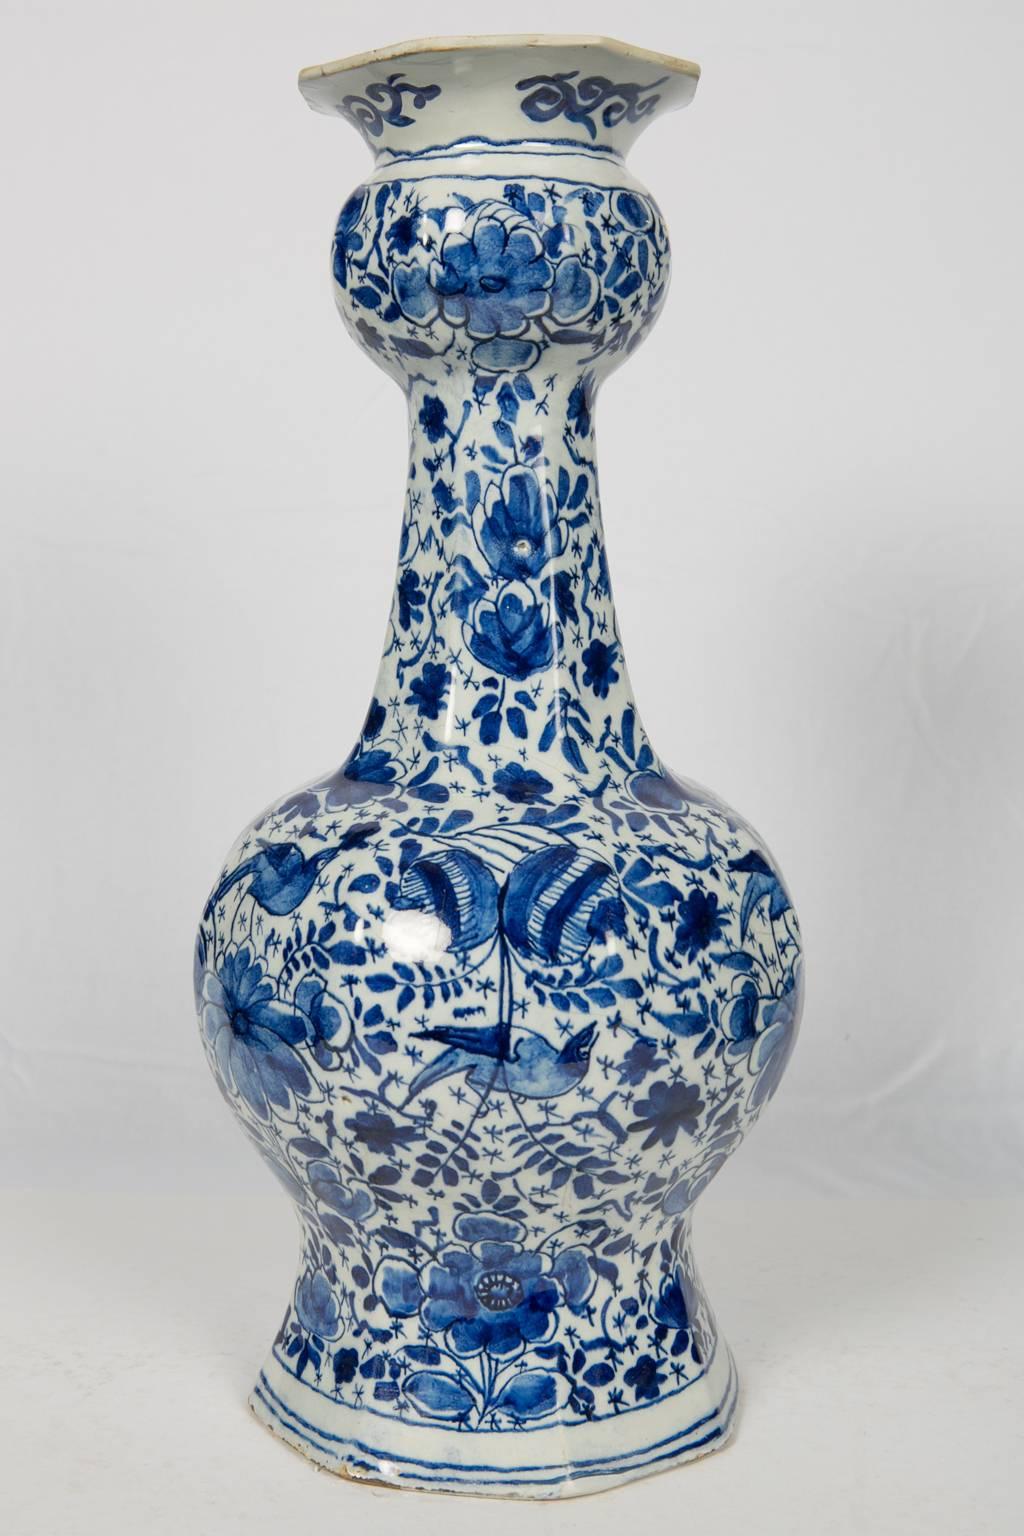 A tall 18th century Blue and White Dutch Delft bottle vase hand-painted with a lovely all around pattern of songbirds among large flowers and scrolling vines. Made circa 1780, the vase is hand-painted in deep cobalt blue. The octagonal design was